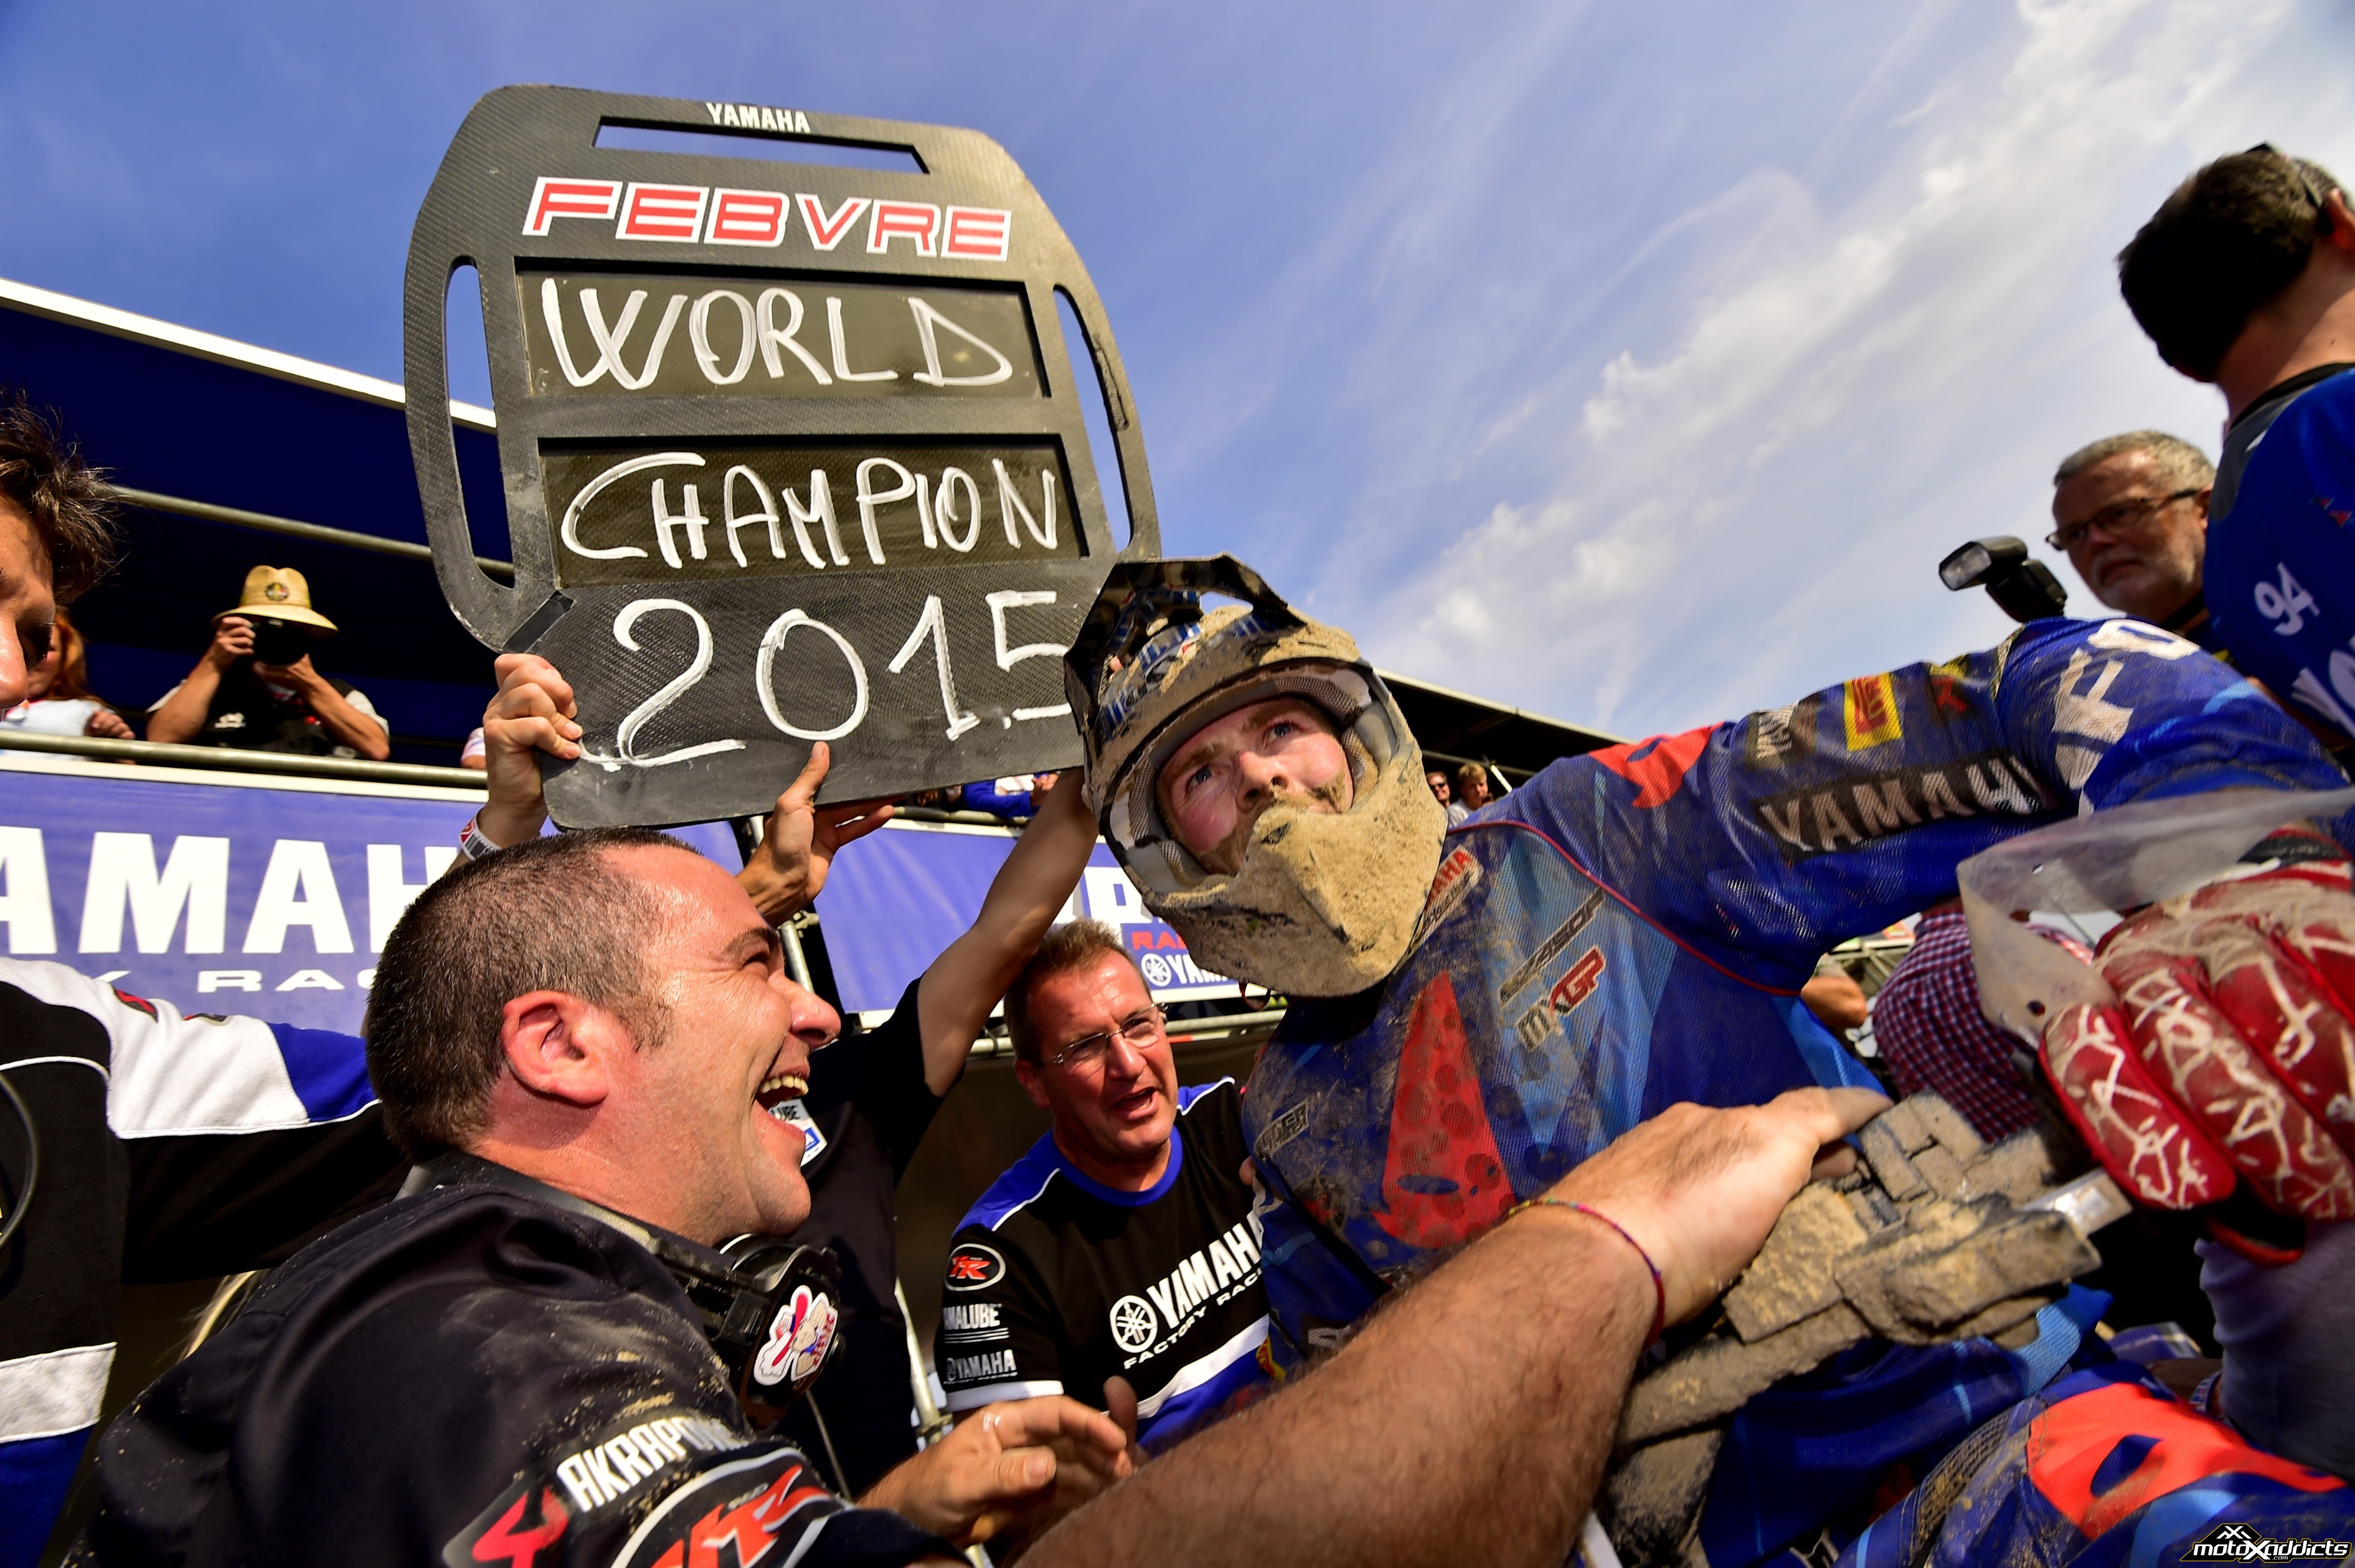 The celebration was a big one for the French World Champion. 